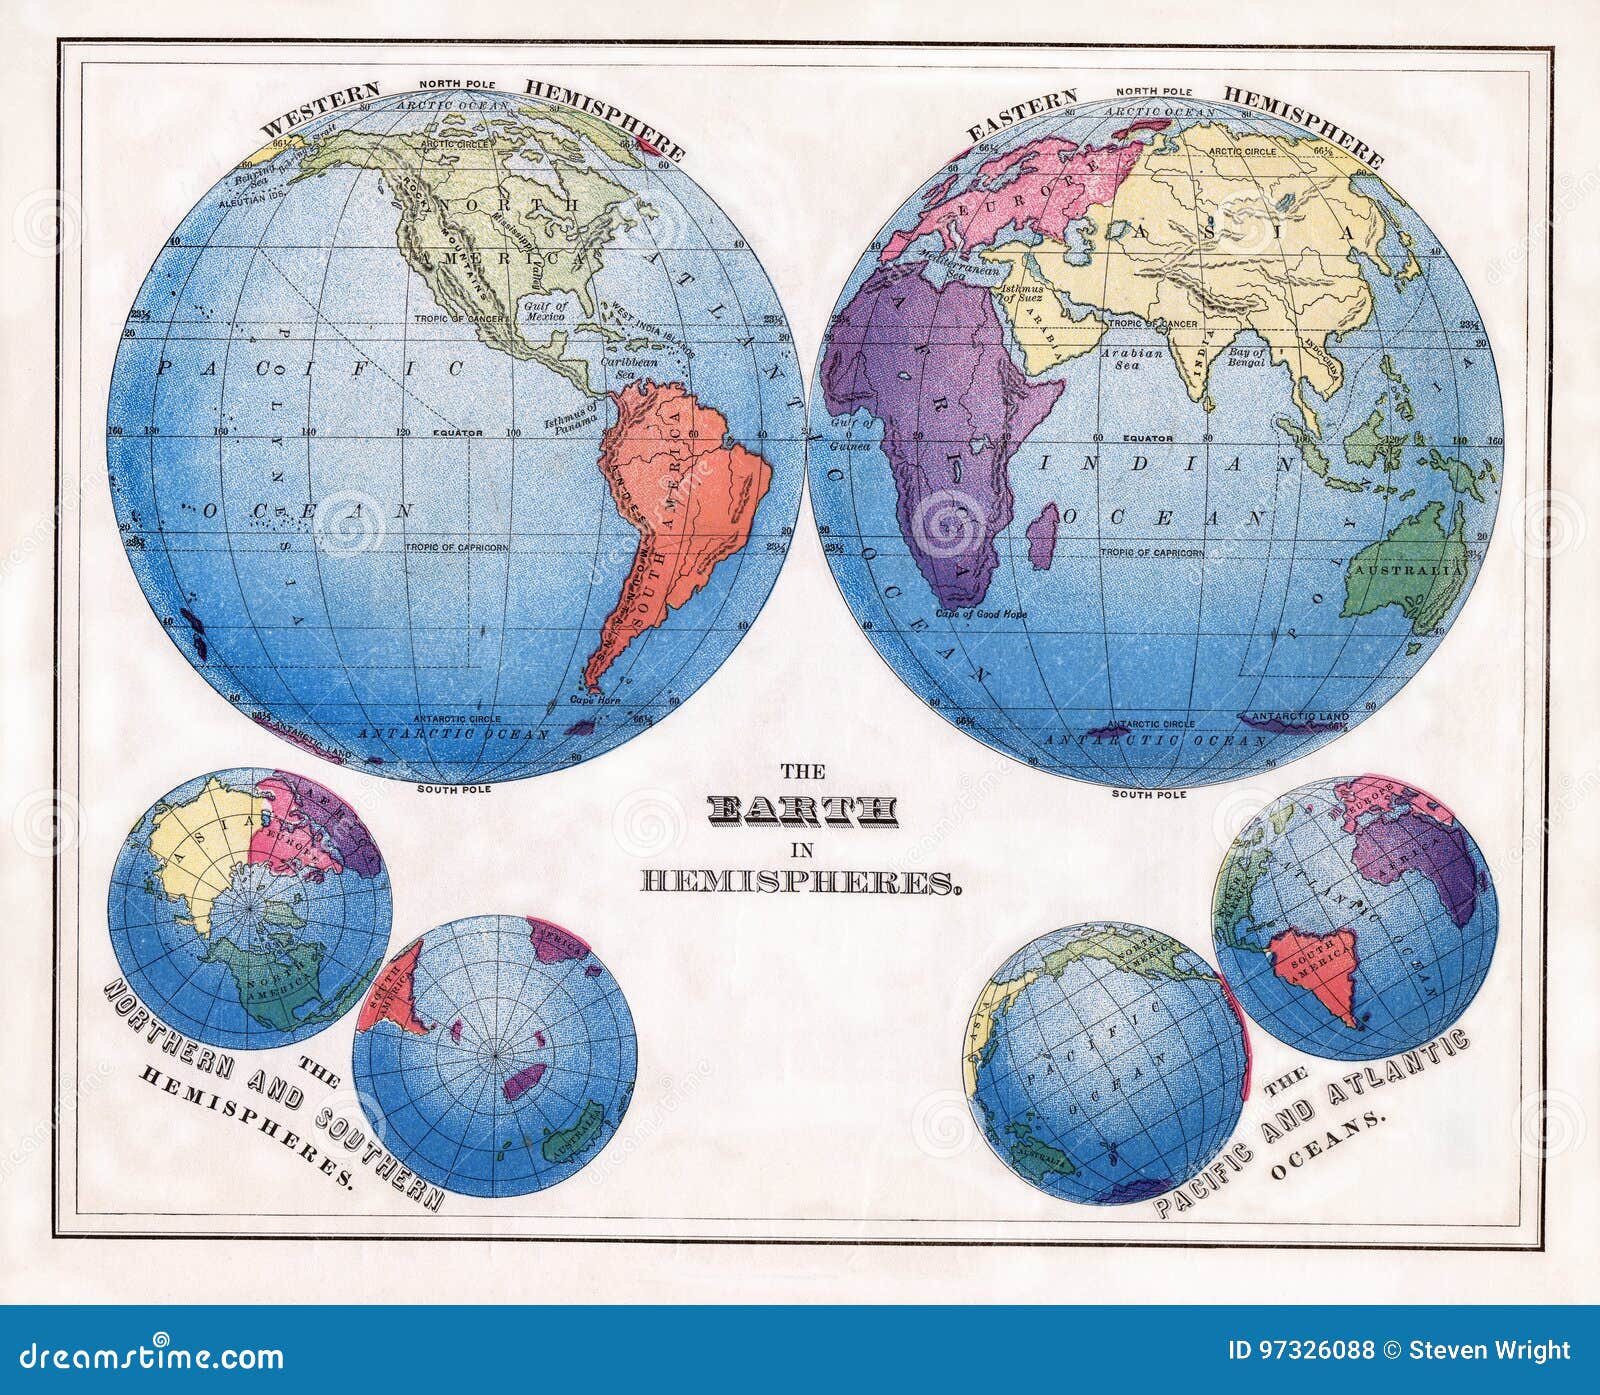 1874 antique warren print of the world in hemispheres with polar projections